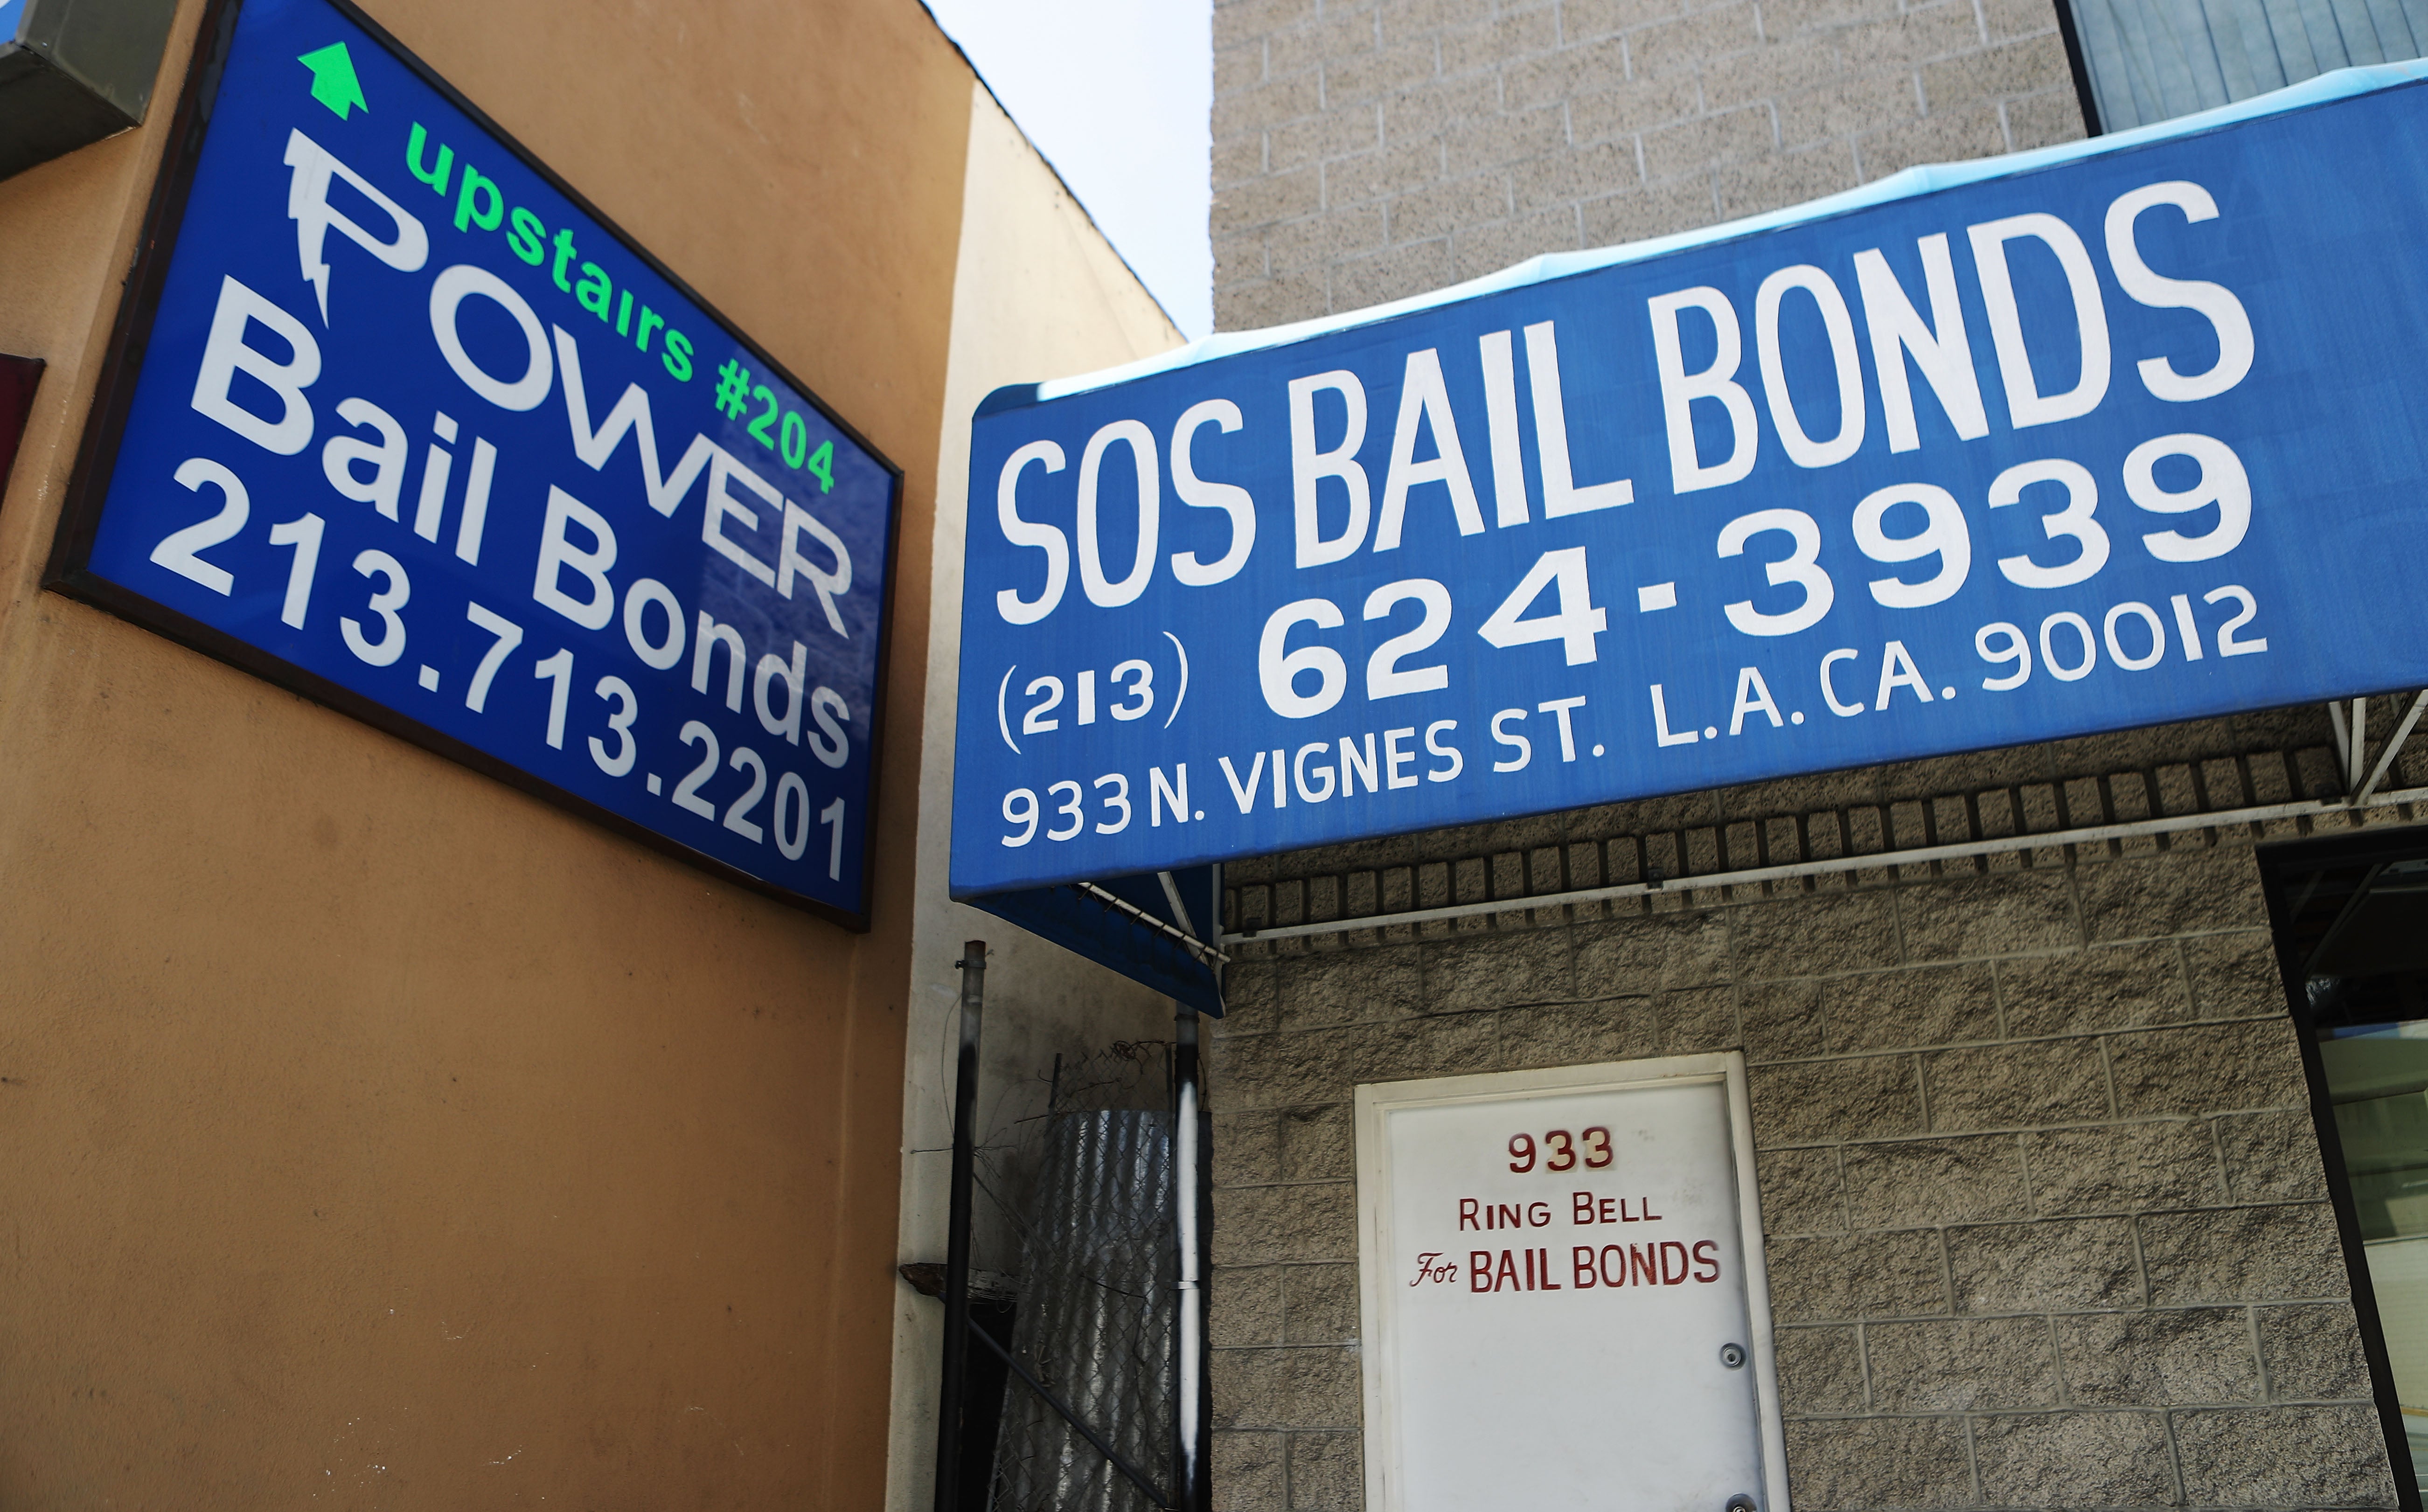 Signs advertise bail bond companies on August 29, 2018 in Los Angeles, California.